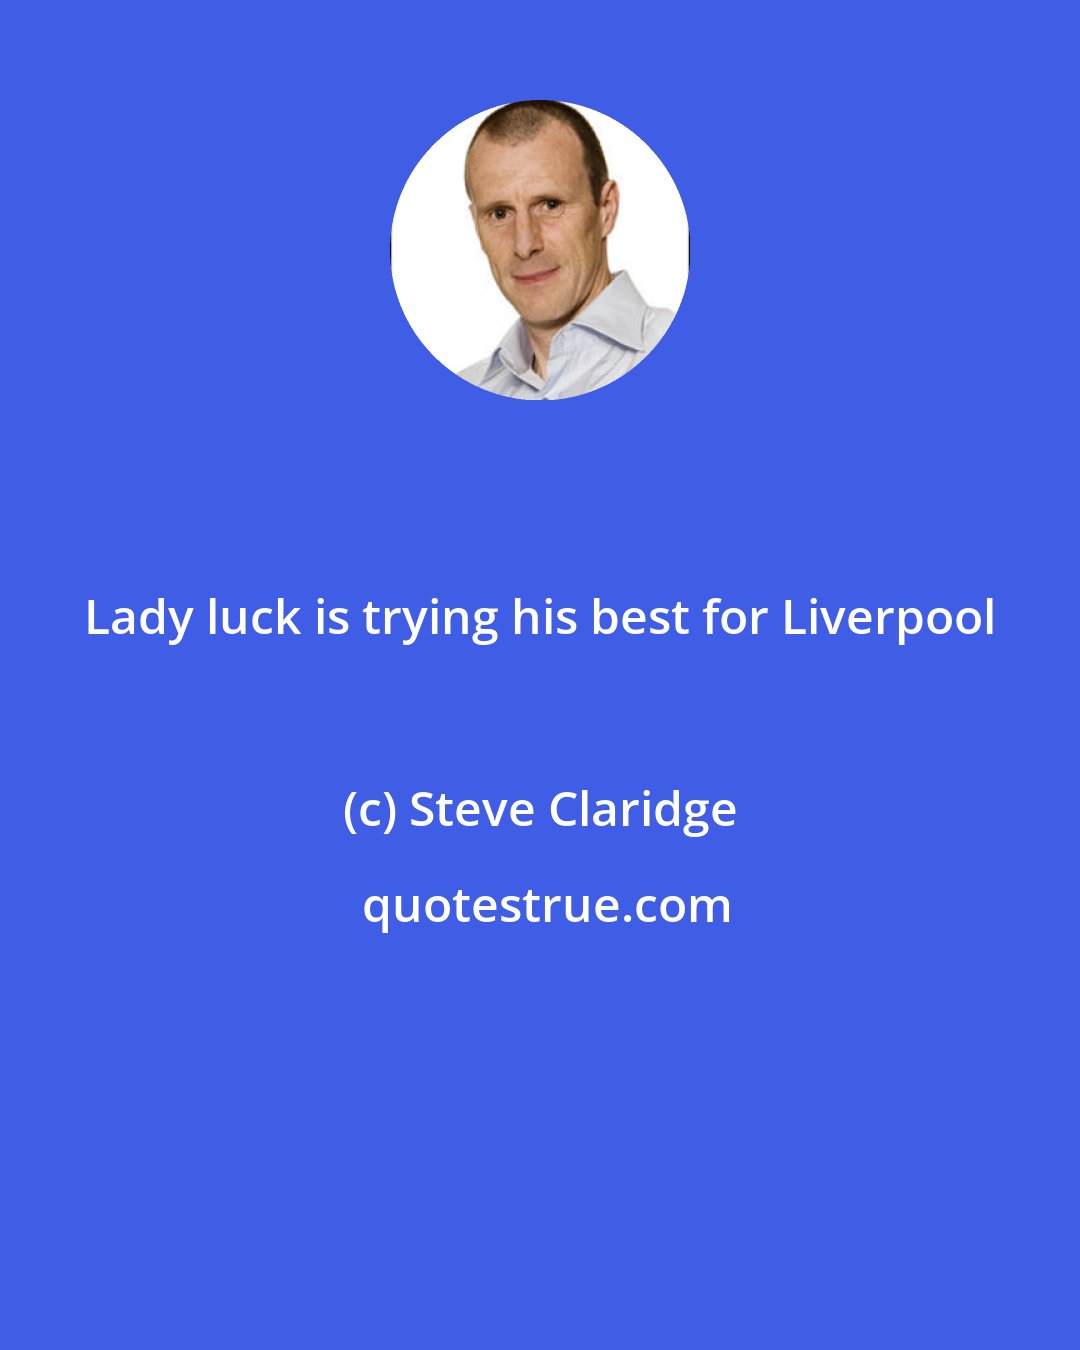 Steve Claridge: Lady luck is trying his best for Liverpool